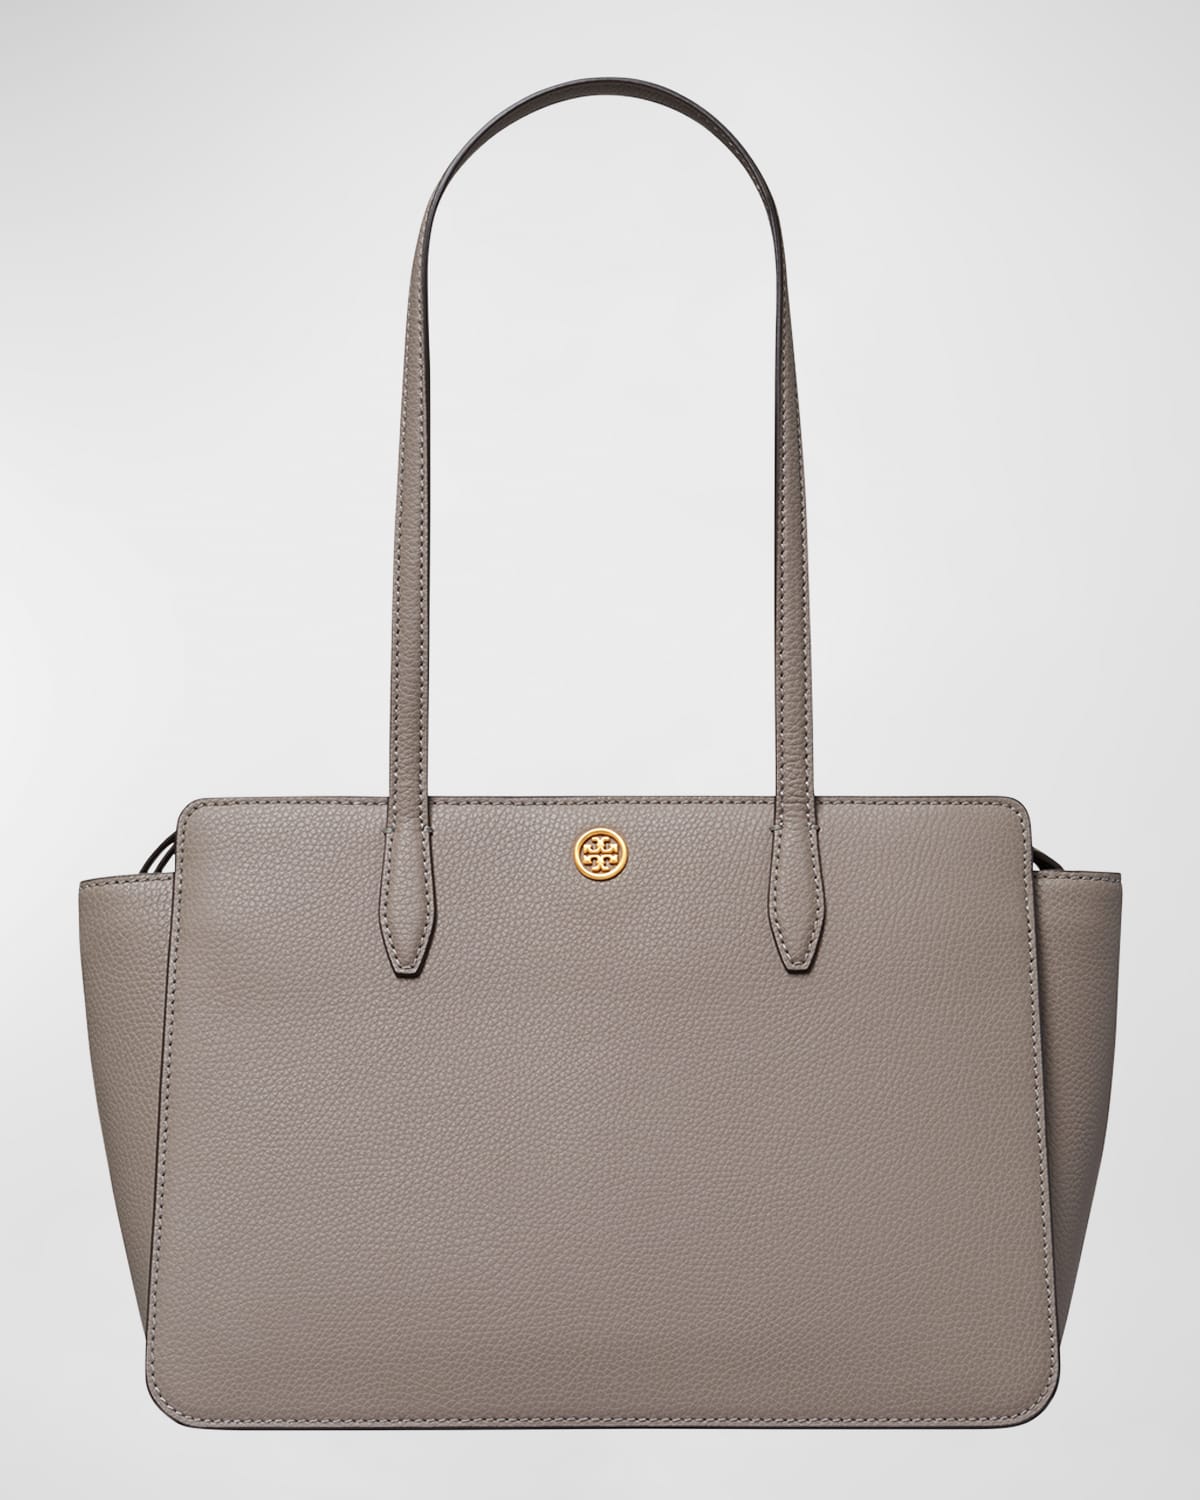 TORY BURCH ROBINSON SMALL PEBBLED LEATHER TOTE BAG